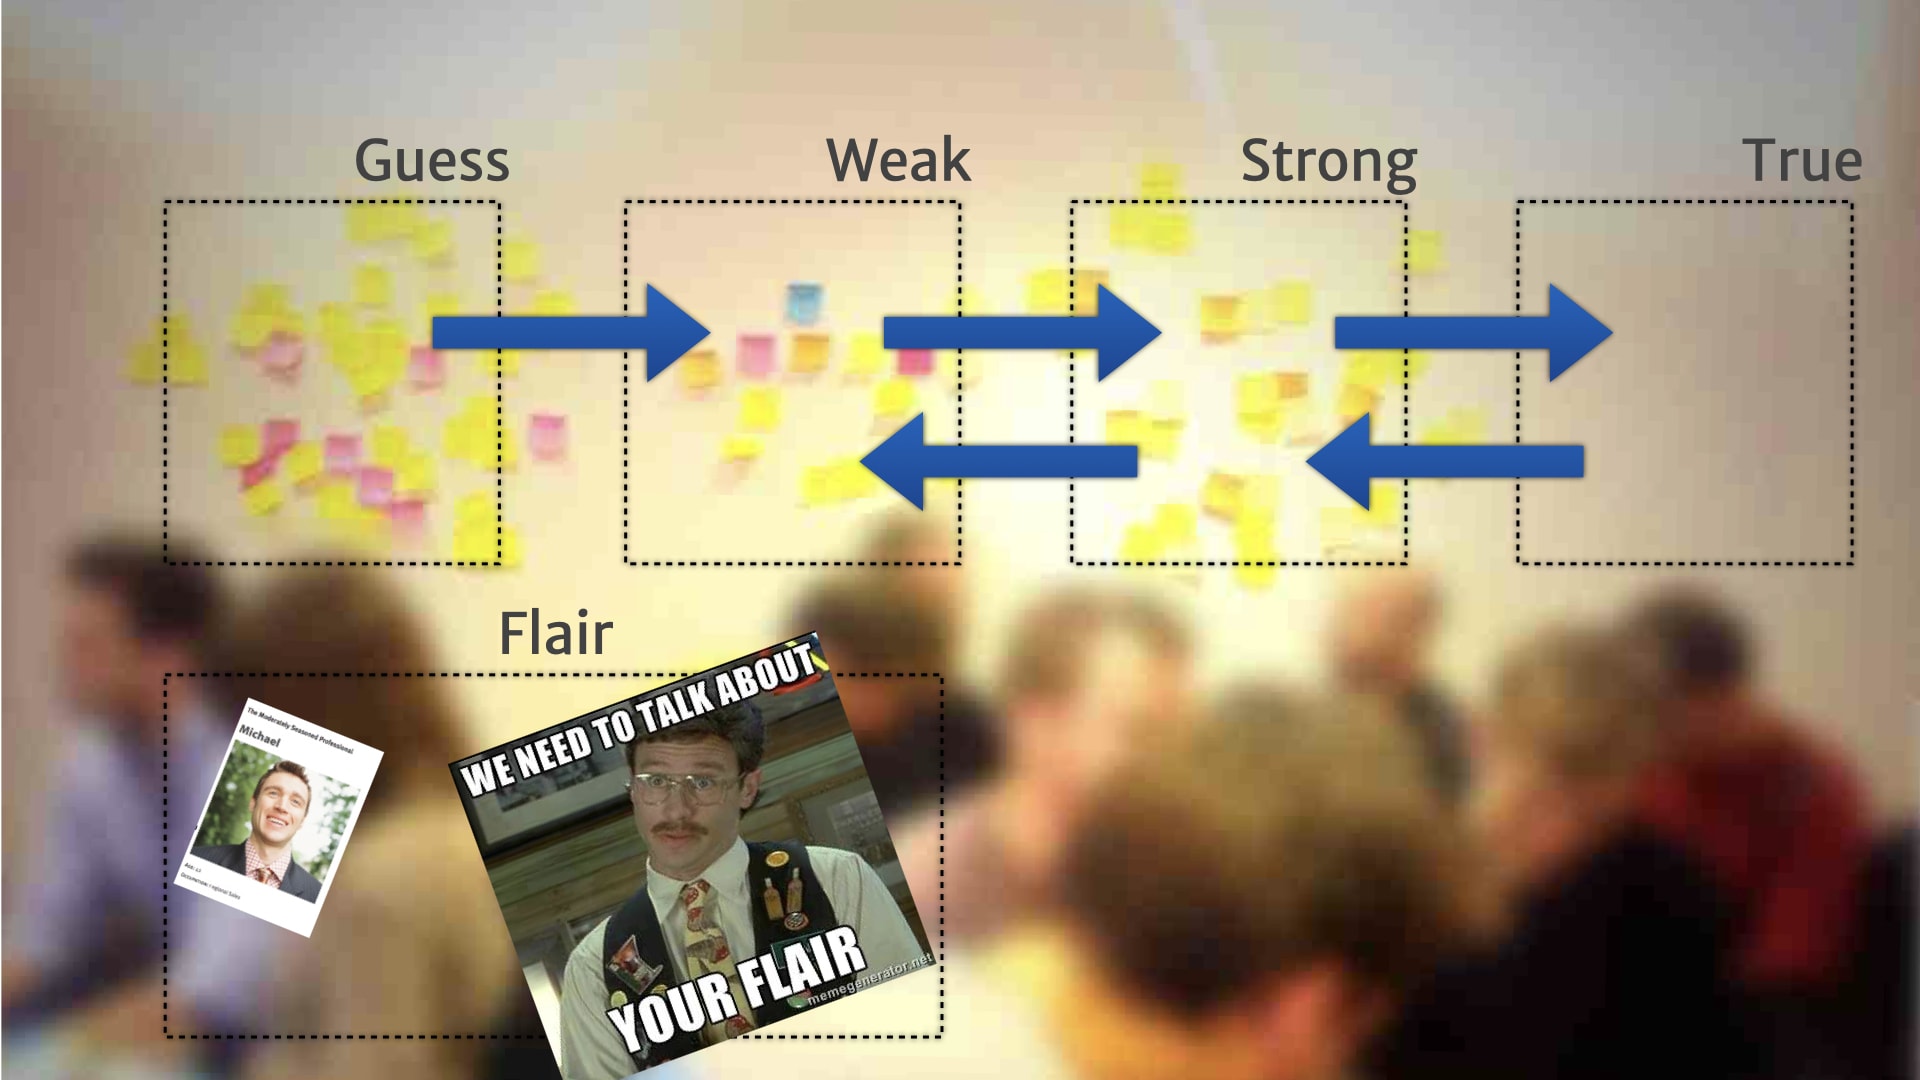 A picture of a wall of post-it notes divided into four categories running left to right (Guess, Weak, Strong, and True). Blue arrows running left-to-right and right-to-left illustrate transitions between the sections. Underneath is another boxed off category labelled 'Flair' containing some photos.